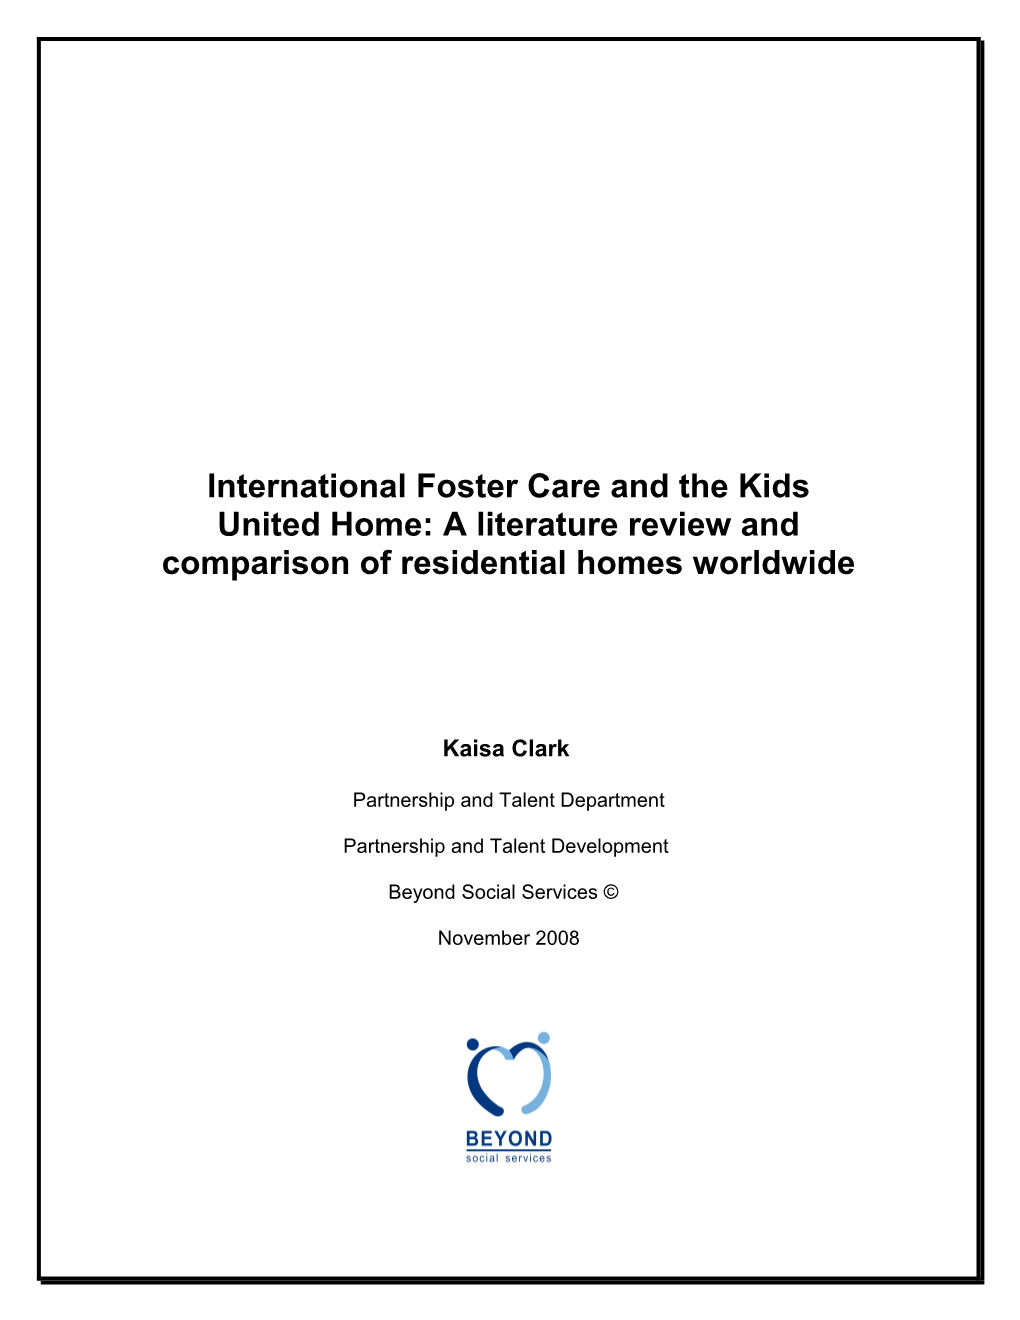 Implications of Foster Care Executive Summary